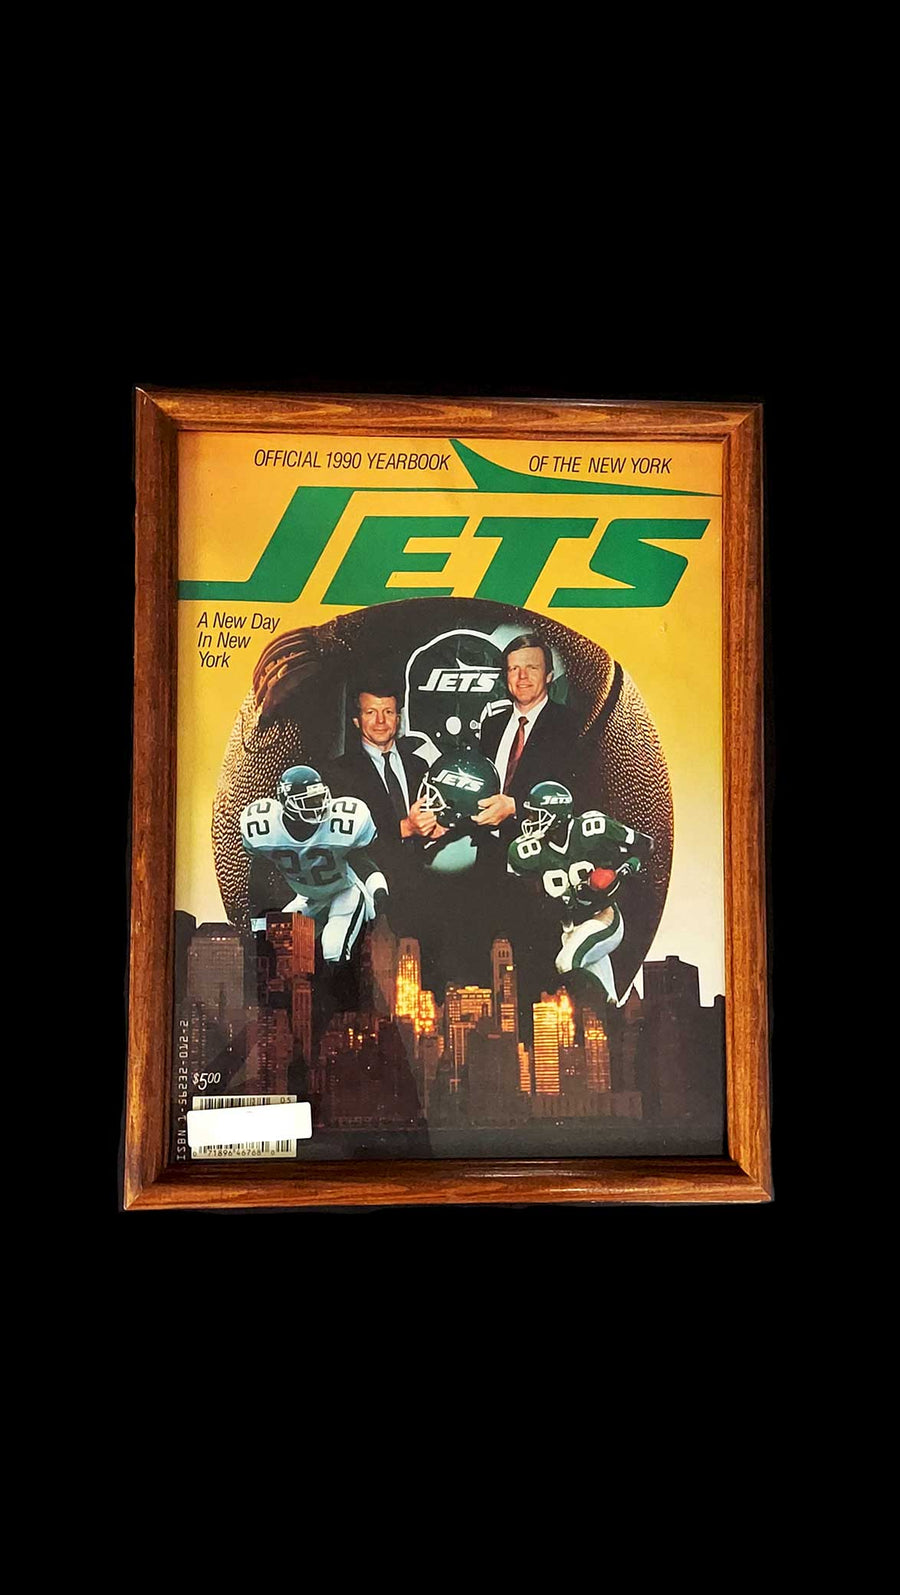 Official-1990-Yearbook-New-York-Jets-A-new-Day-in-New-York